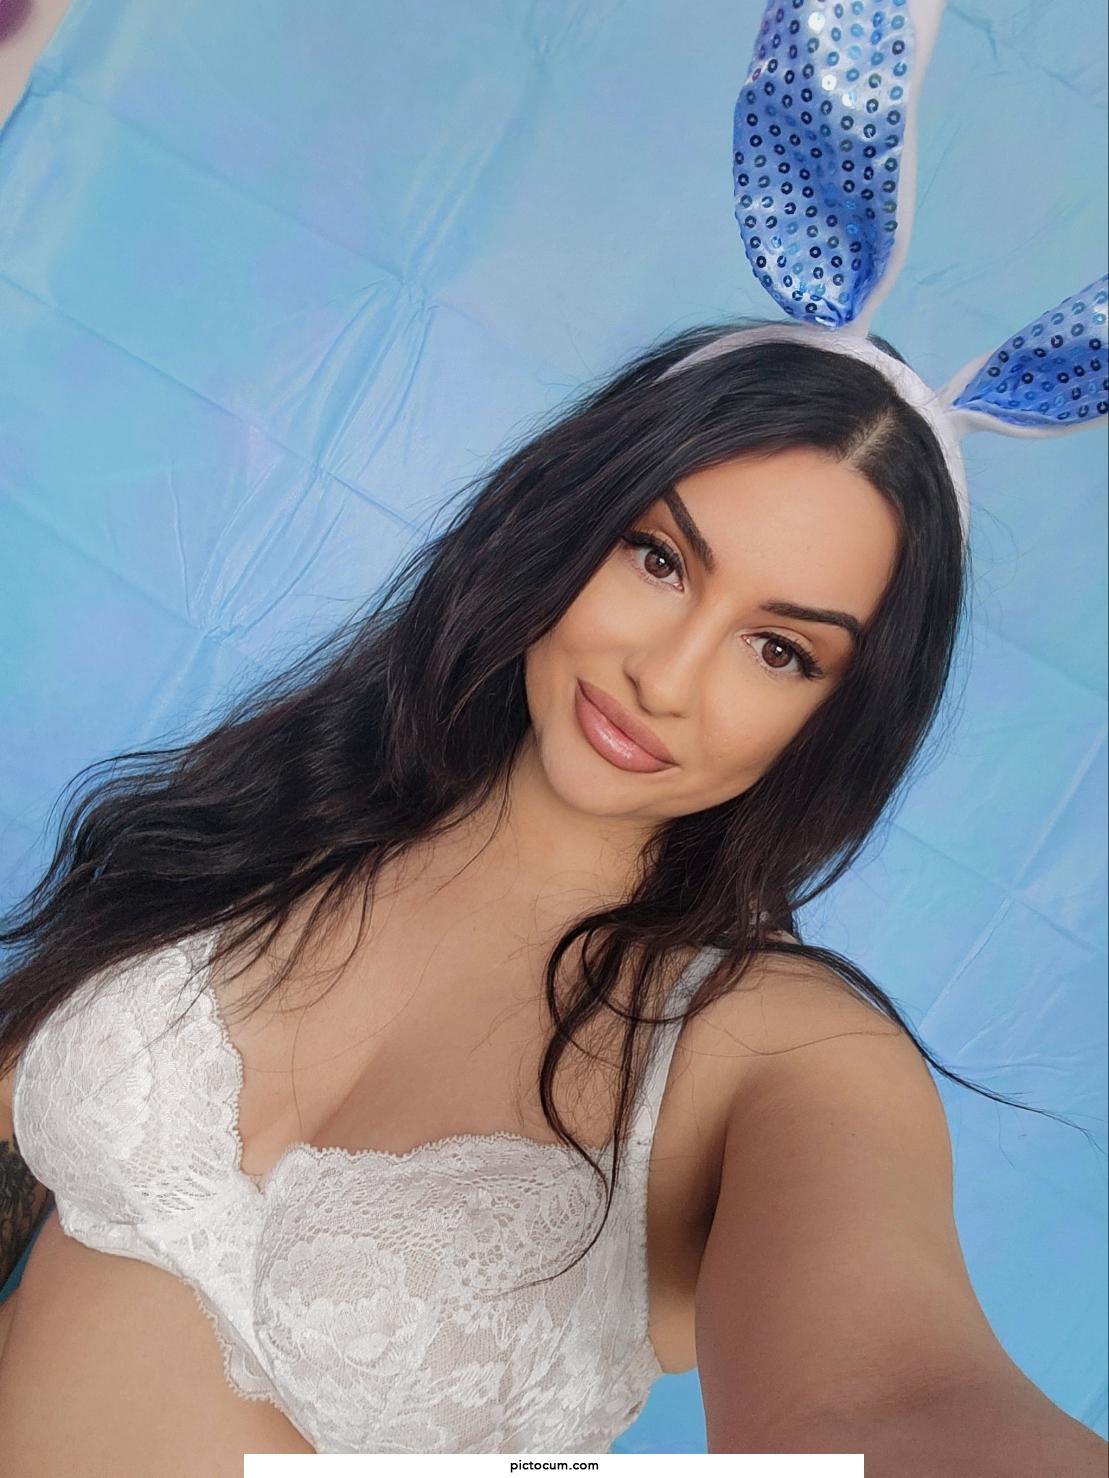 So I make a sexy or cute Easter bunny ? 🐰💗